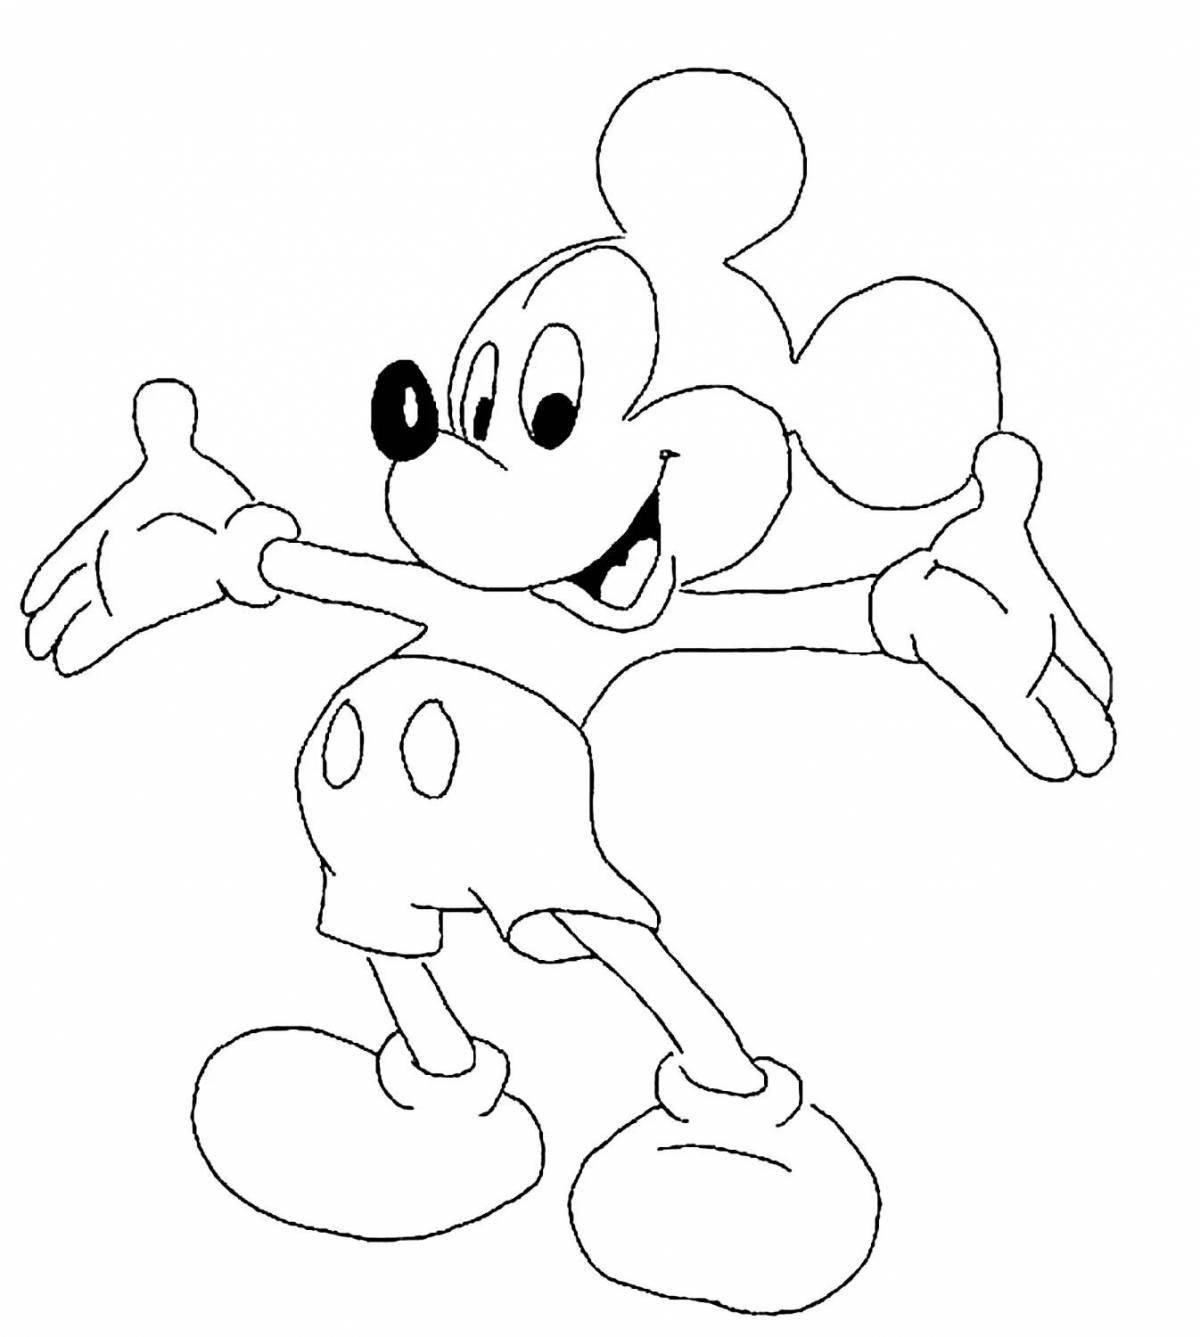 Exciting cartoon character coloring page